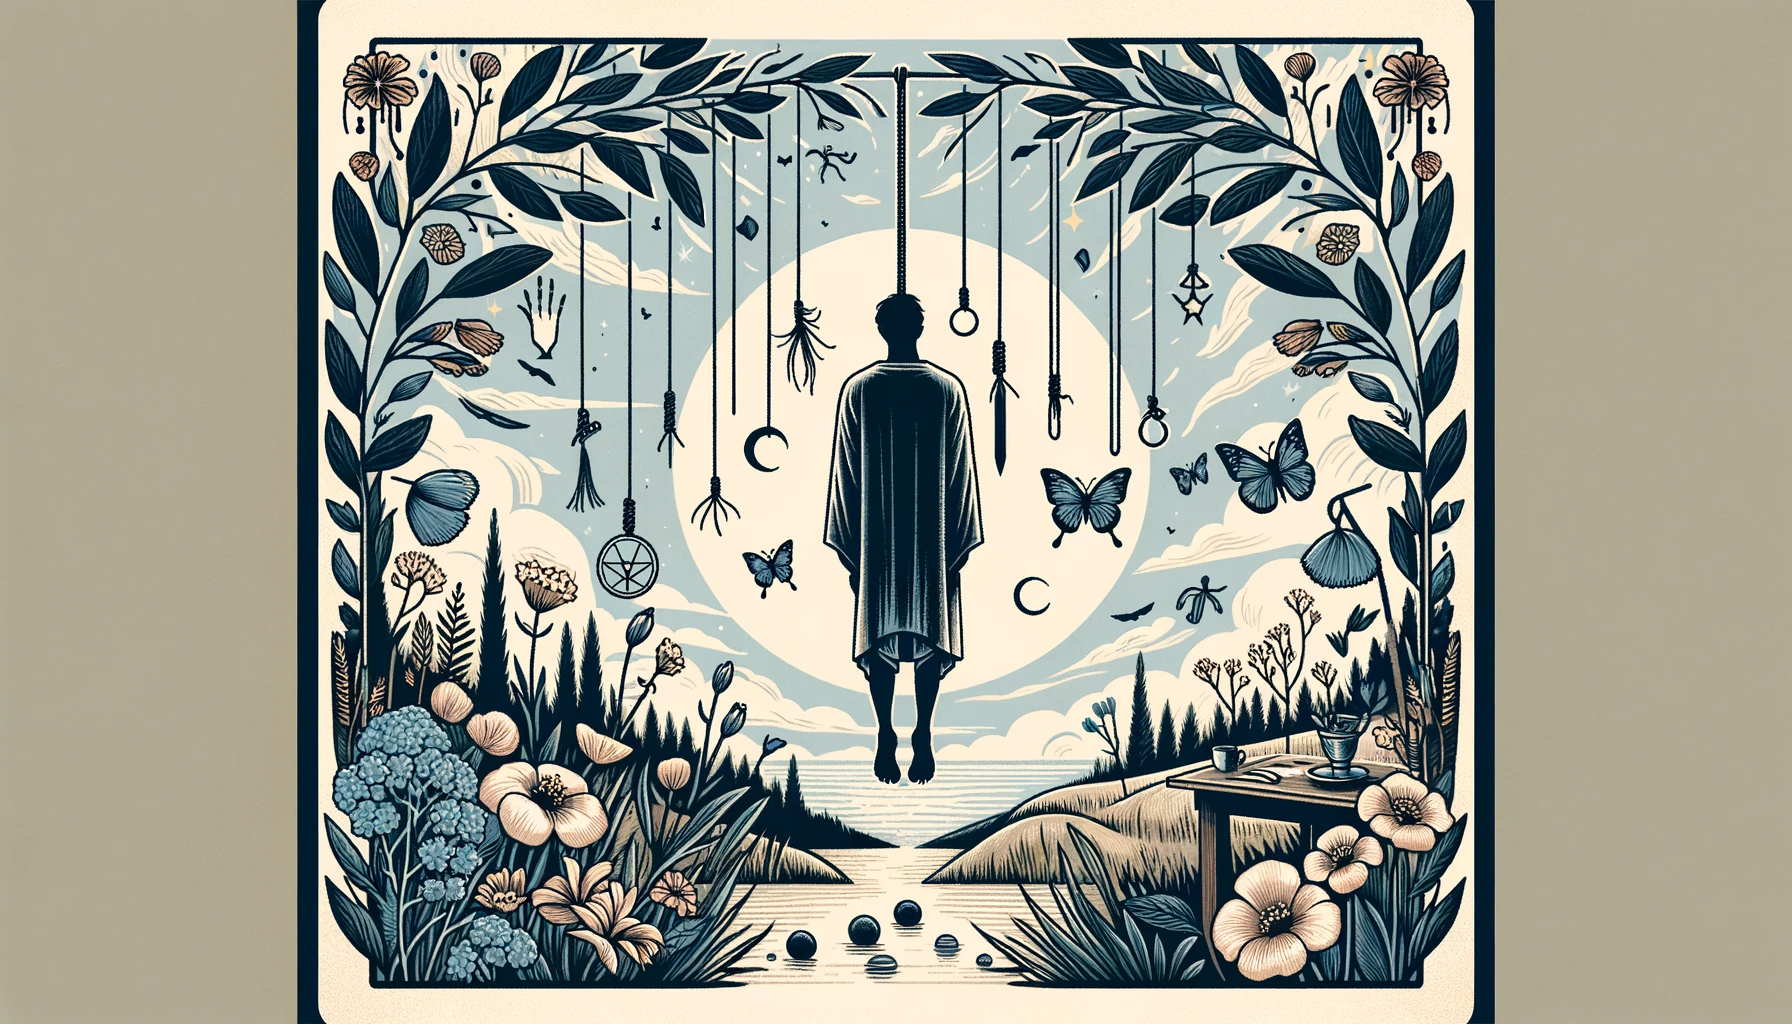 "Illustration representing introspection, sacrifice, and a new perspective, setting a serene and insightful tone for your article on interpreting 'The Hanged Man' as representing a person."